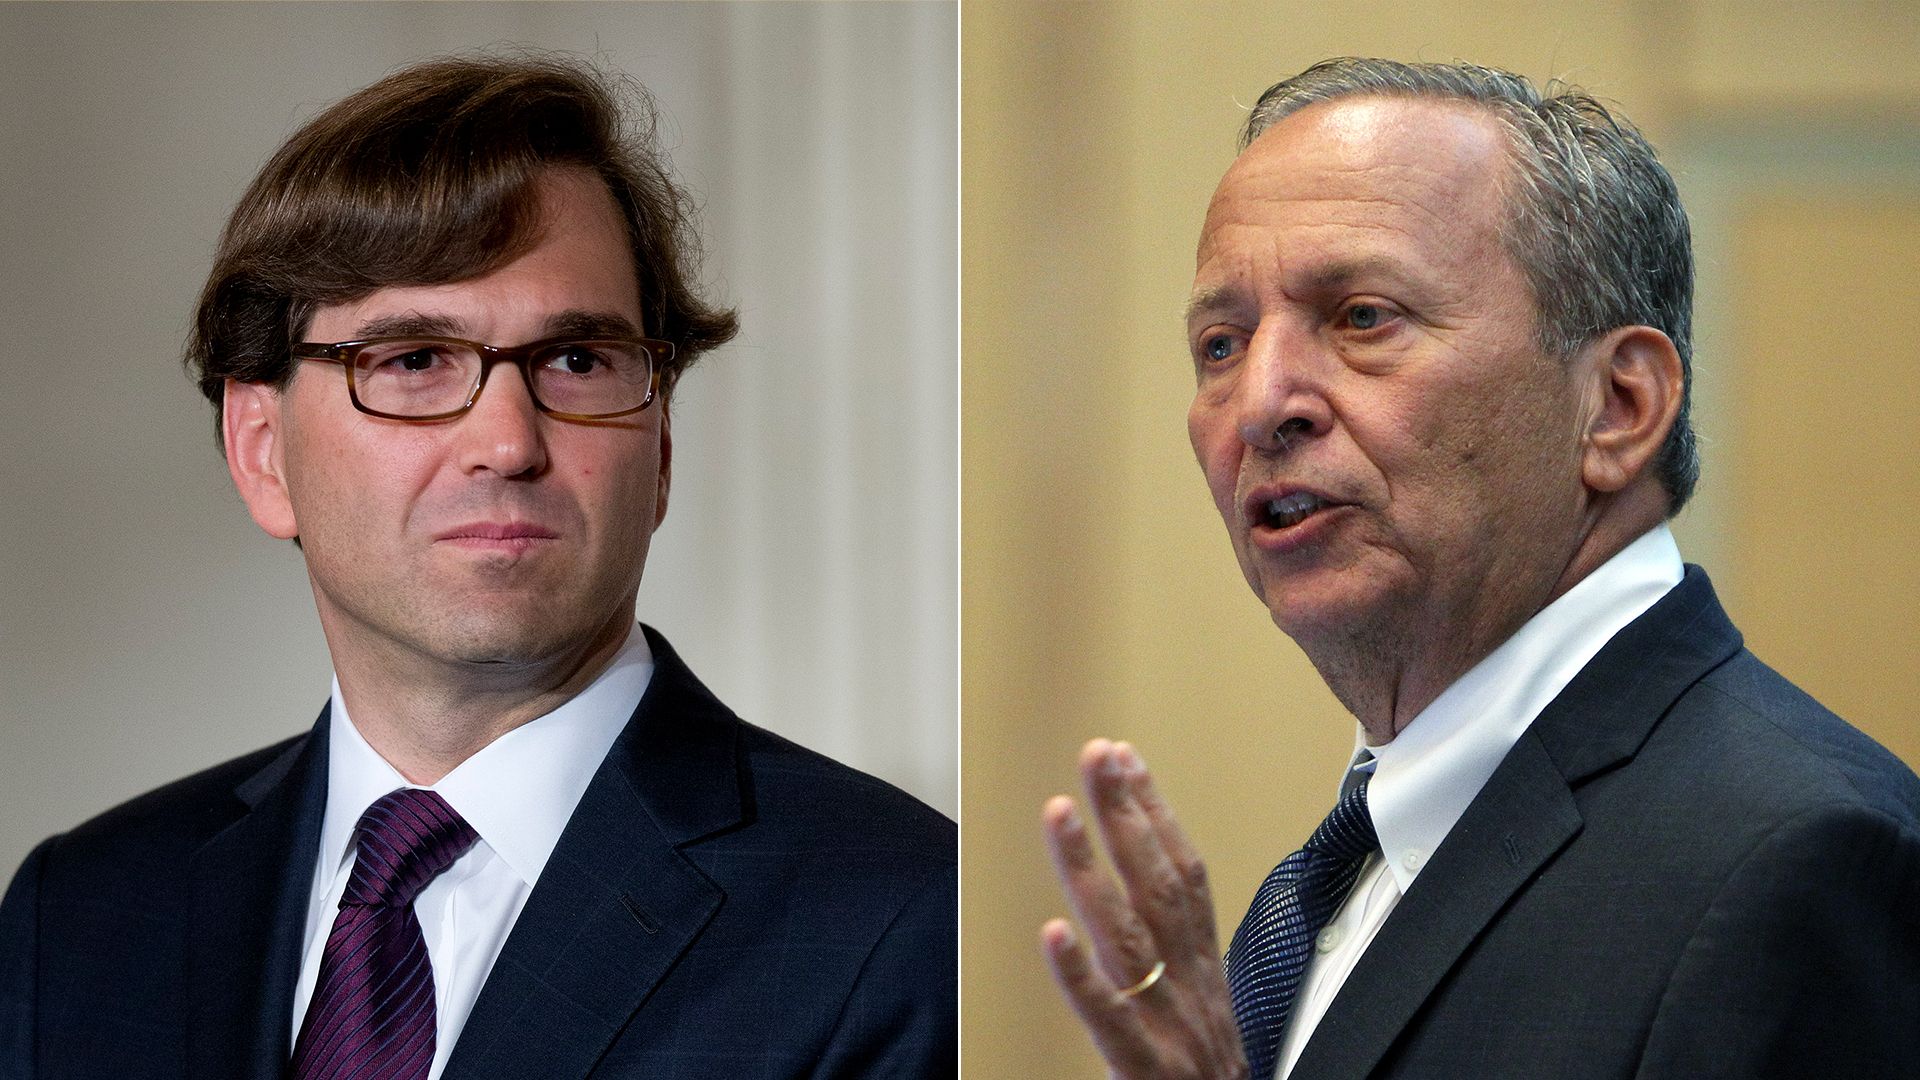 Economists Jason Furman and Larry Summers are seen facing off in a pair of headshots.